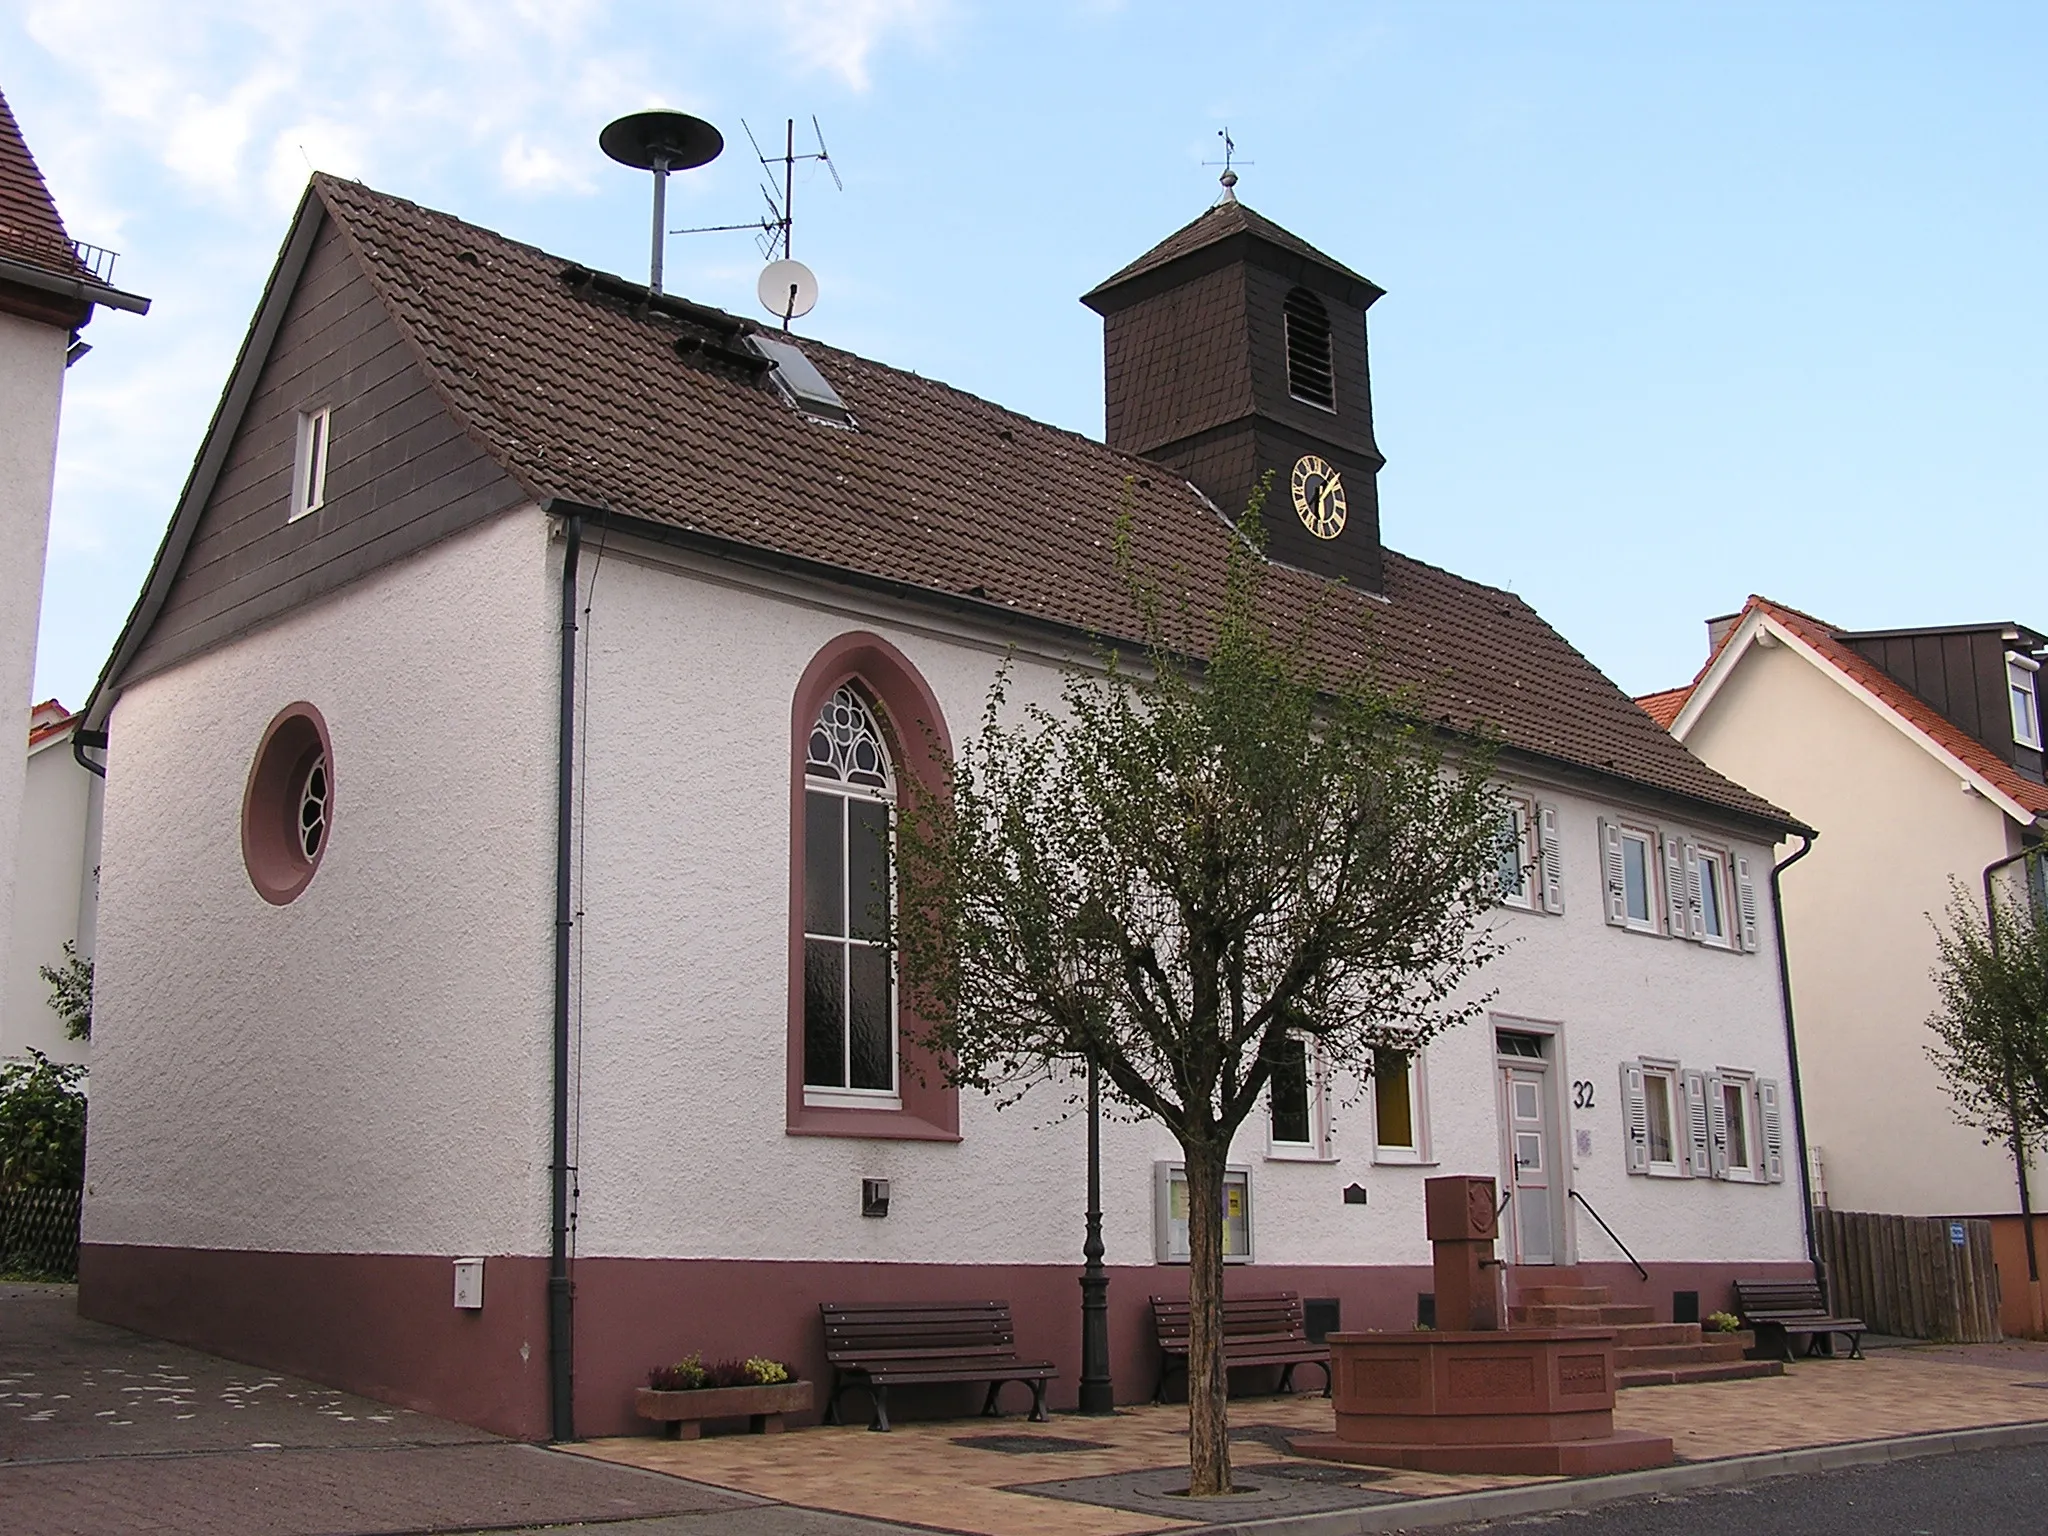 Photo showing: The church in Dillingen, a district of Friedrichsdorf. It is also called “Dillinger Dom” (Cathedral of Dillingen)